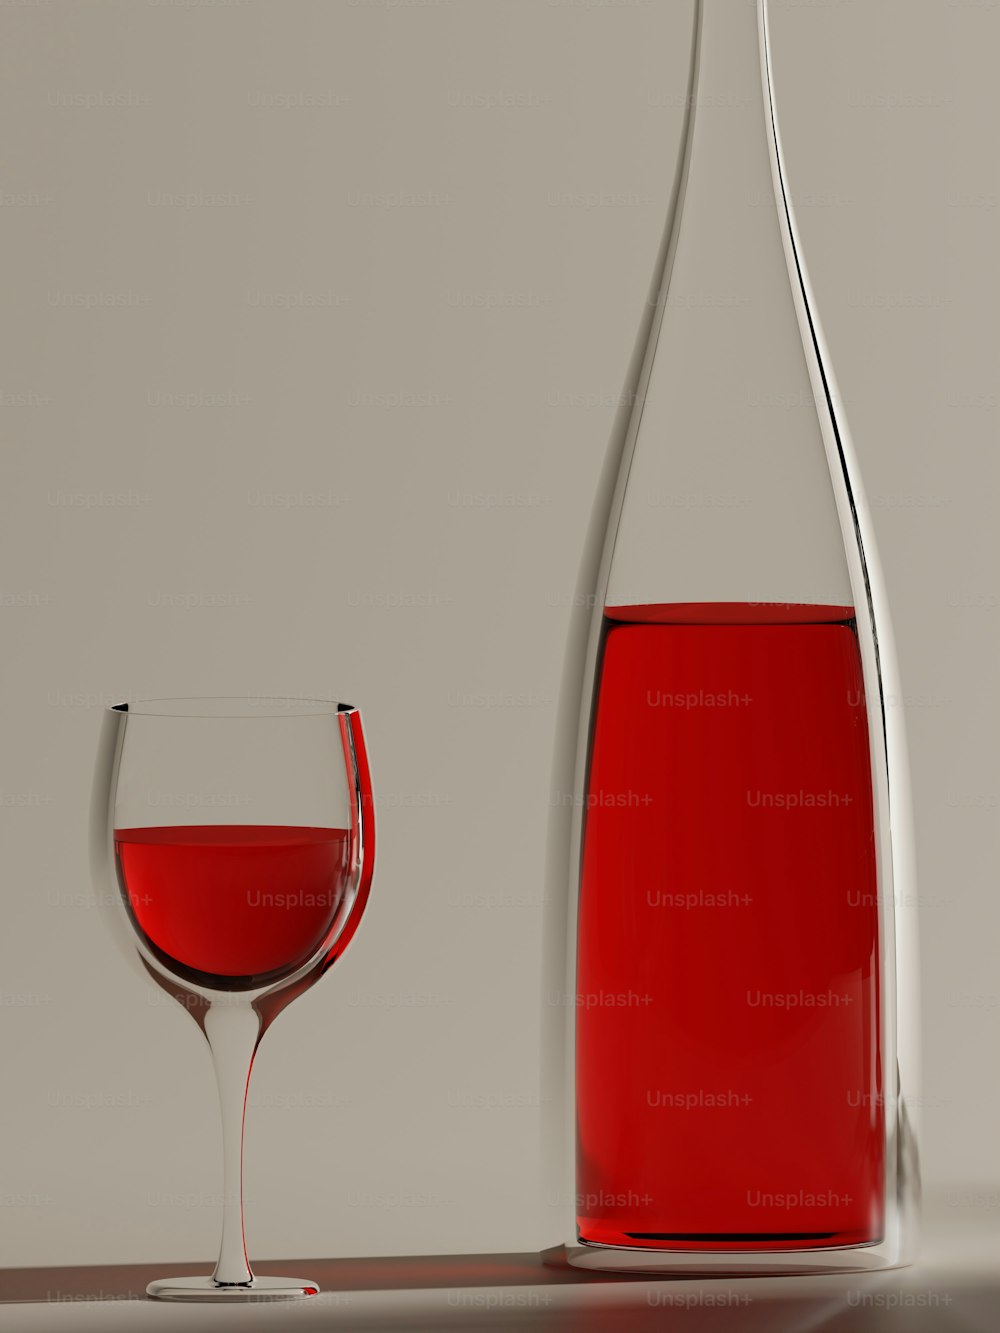 a glass of red wine next to a bottle of wine